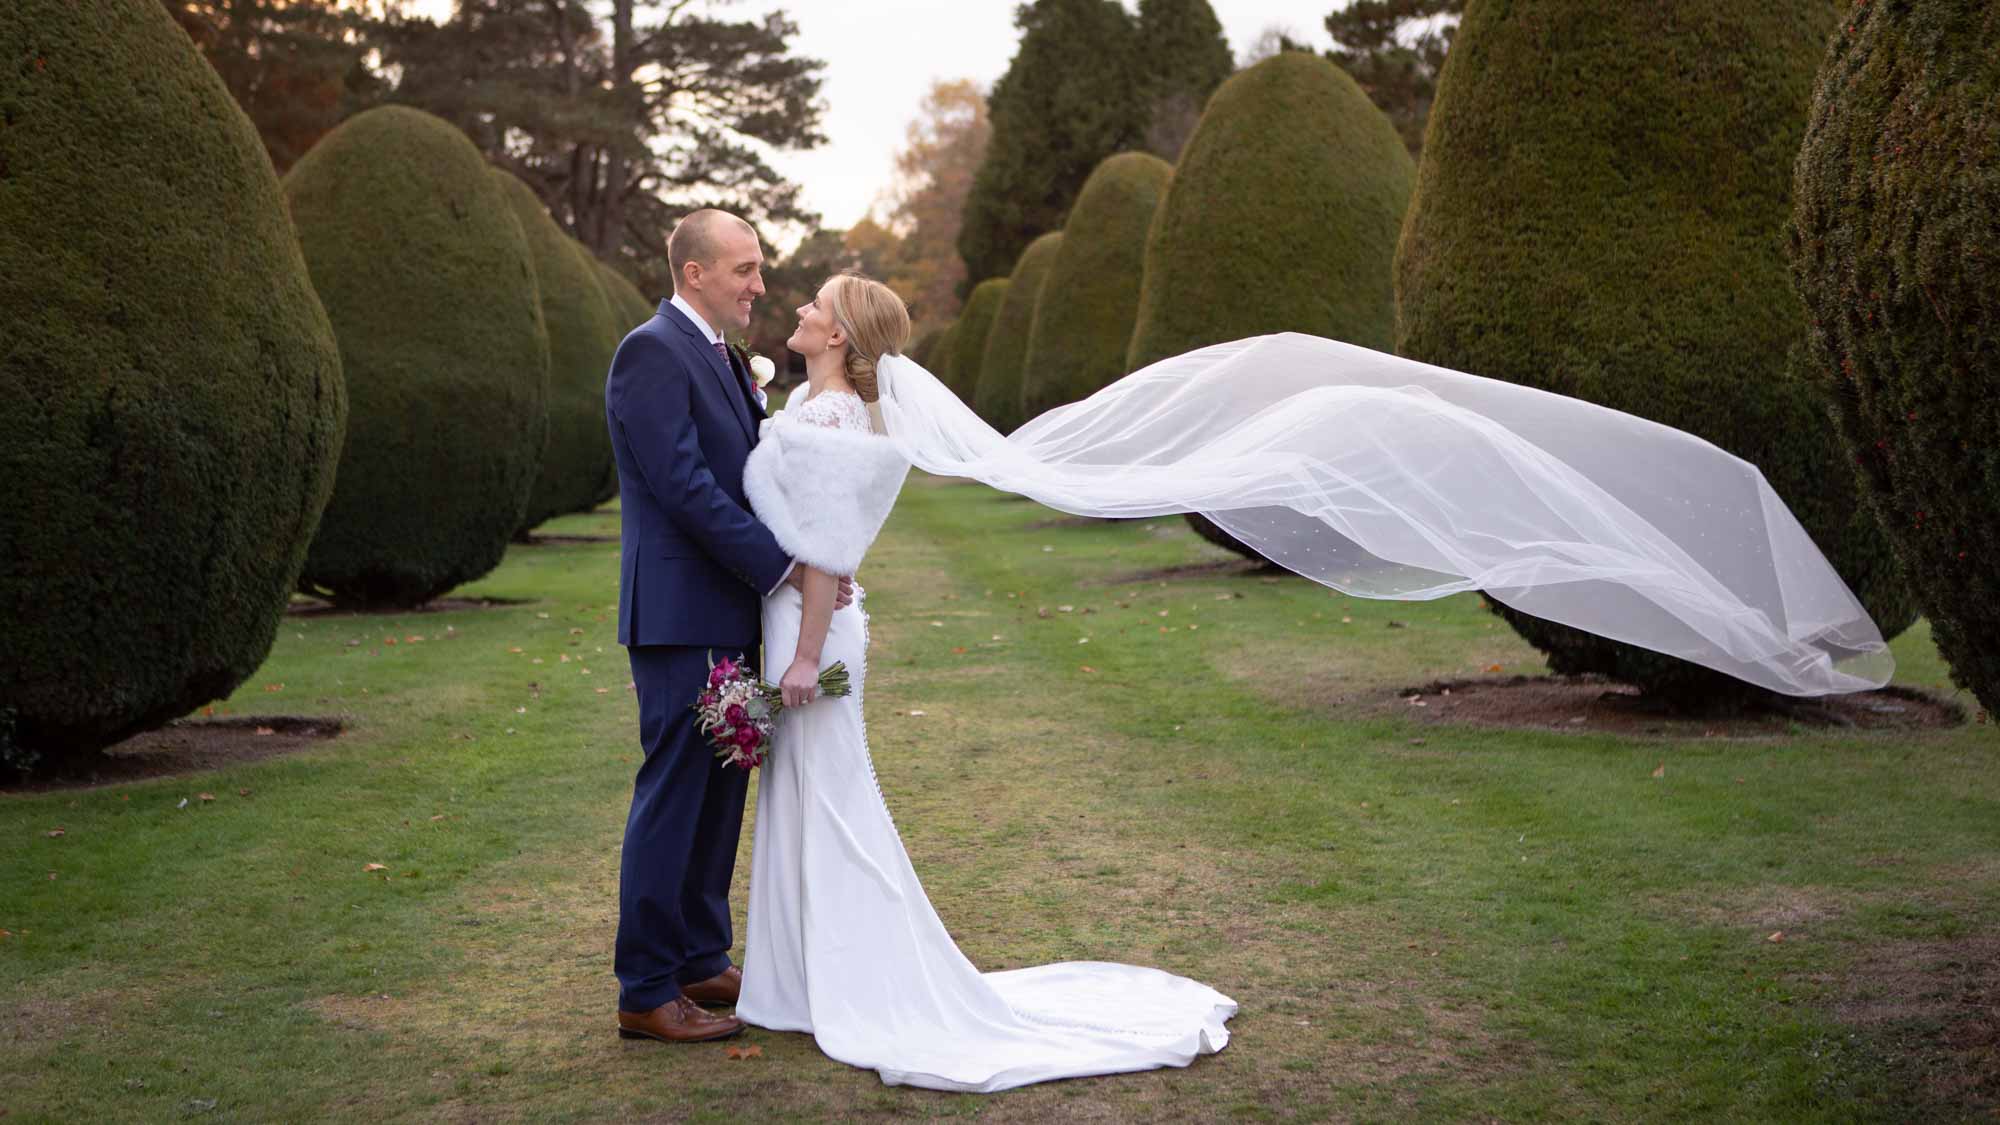 bride and groom stand together in the avenue conifer trees at the Elvetham hotel, her veil floats behind her in the air